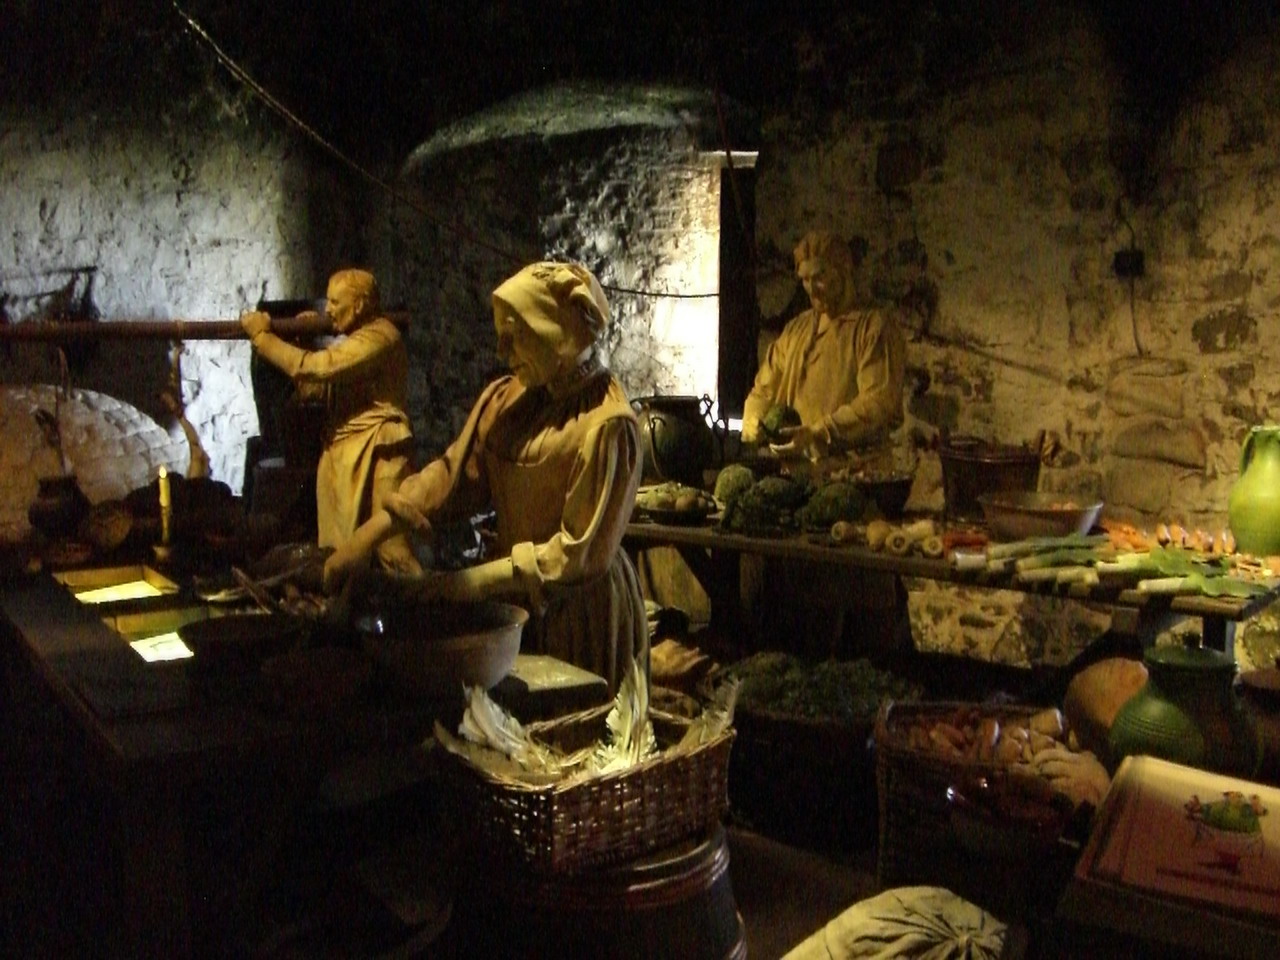 a po of some statues of monks, including one sitting